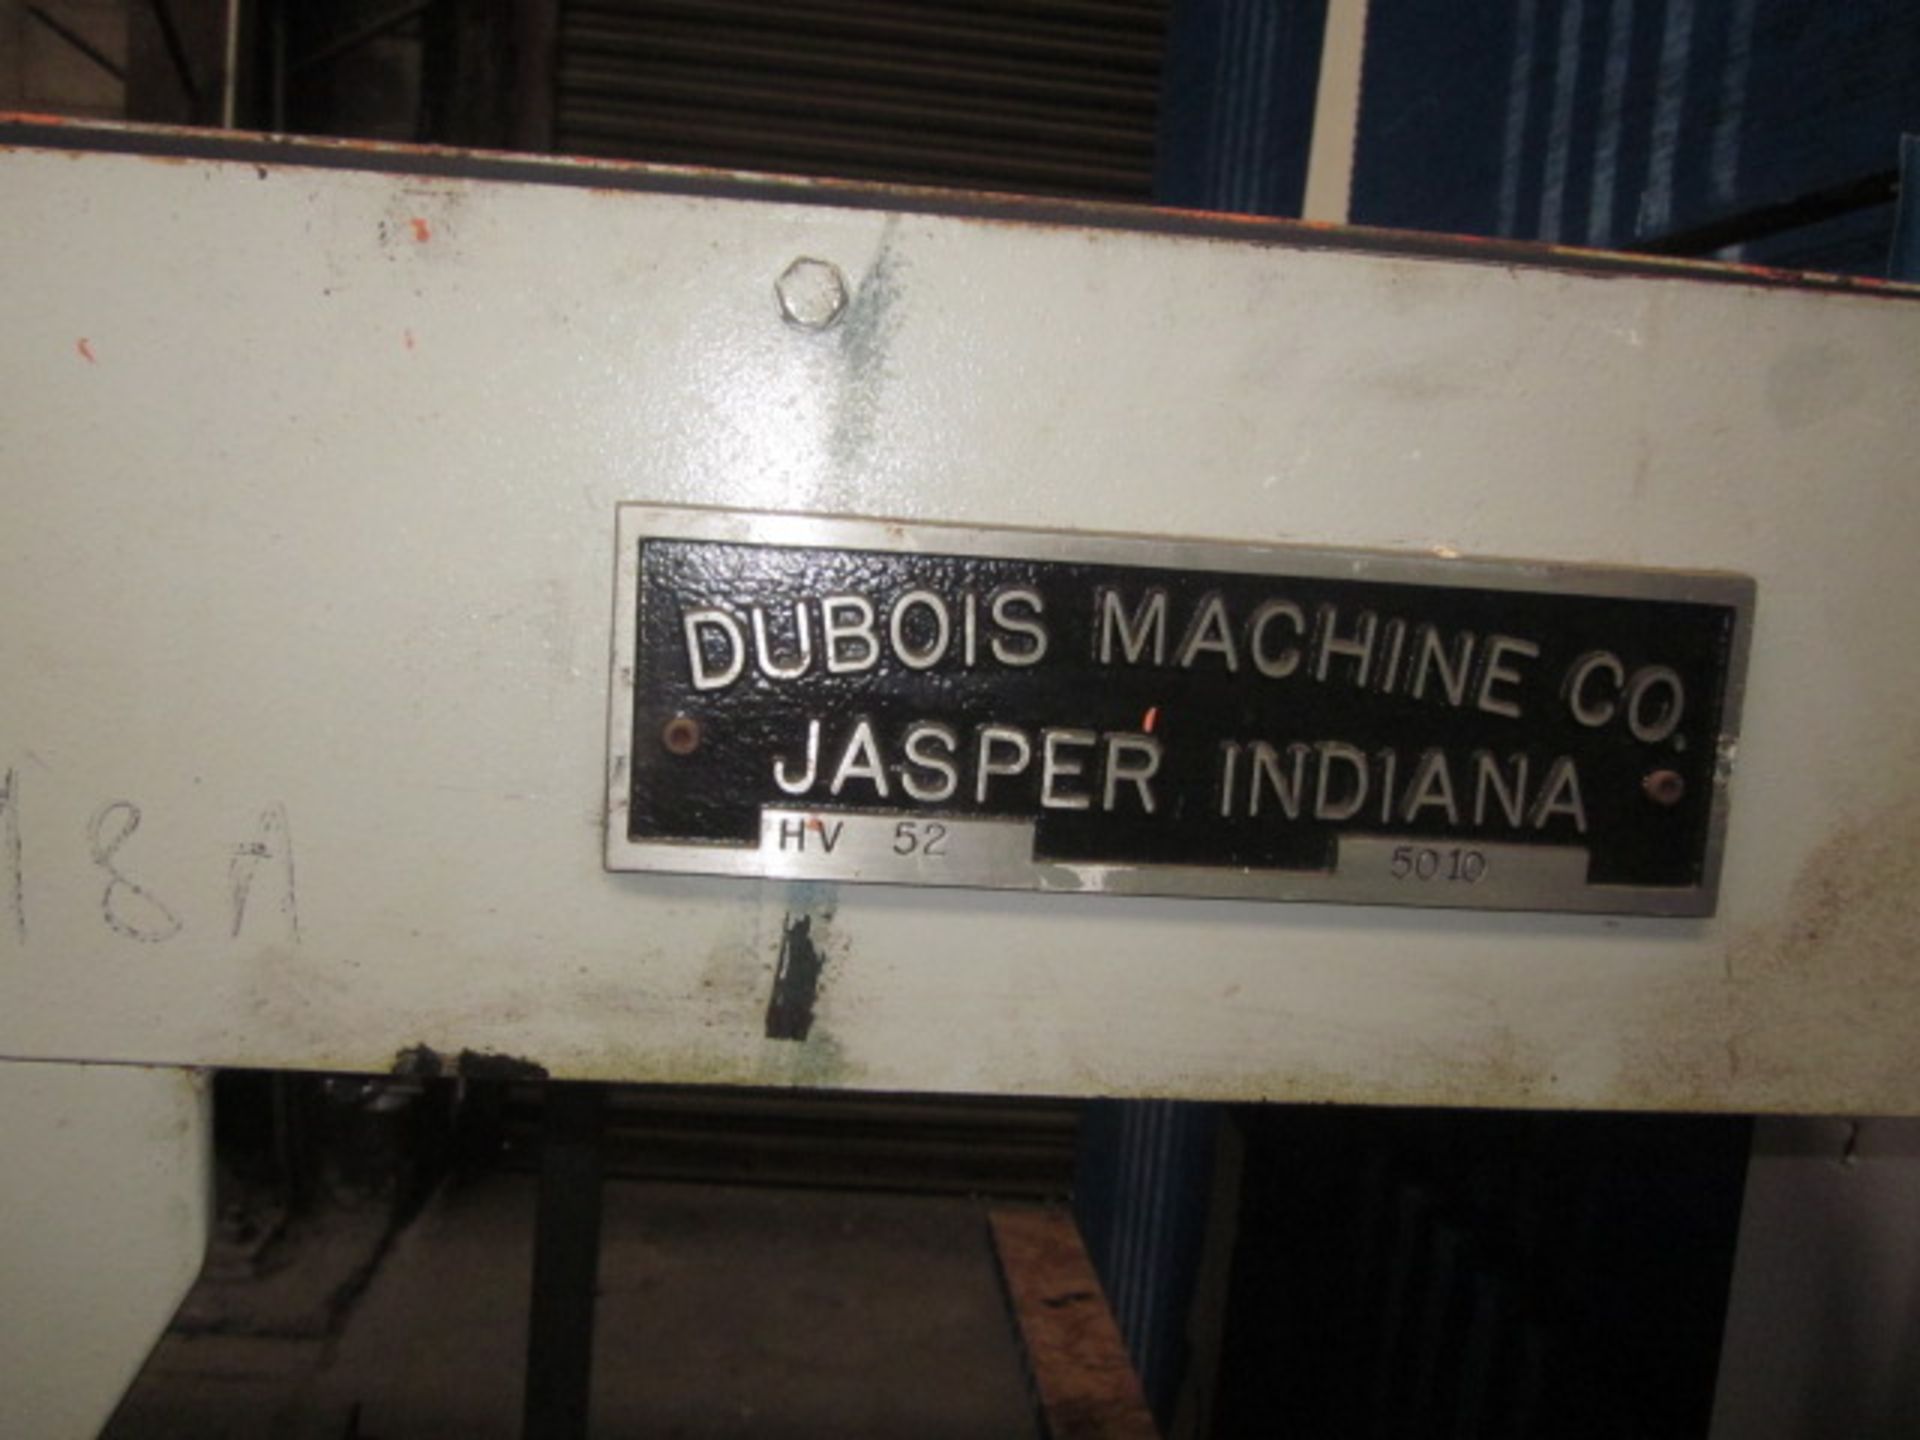 (2) 2012 Dubois Curtain Coaters w/ (1) 2012 Dubois HV 52 Hot Air Oven, Auto Feed & (2) Lift Tables - Image 6 of 19